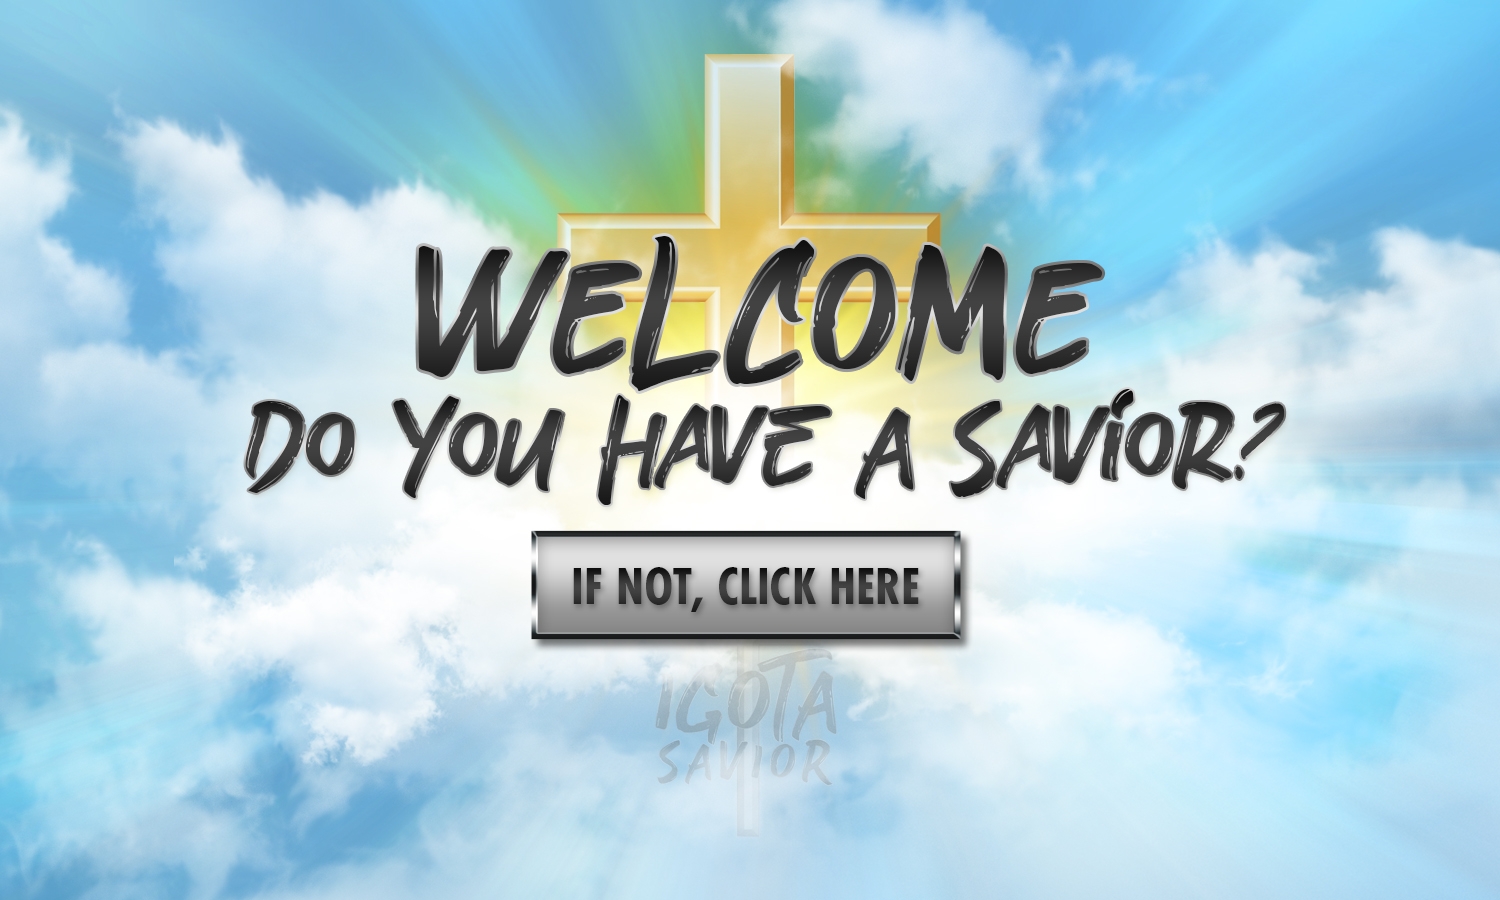 Welcome. Do You Have A Savior? If Not, Click Here.